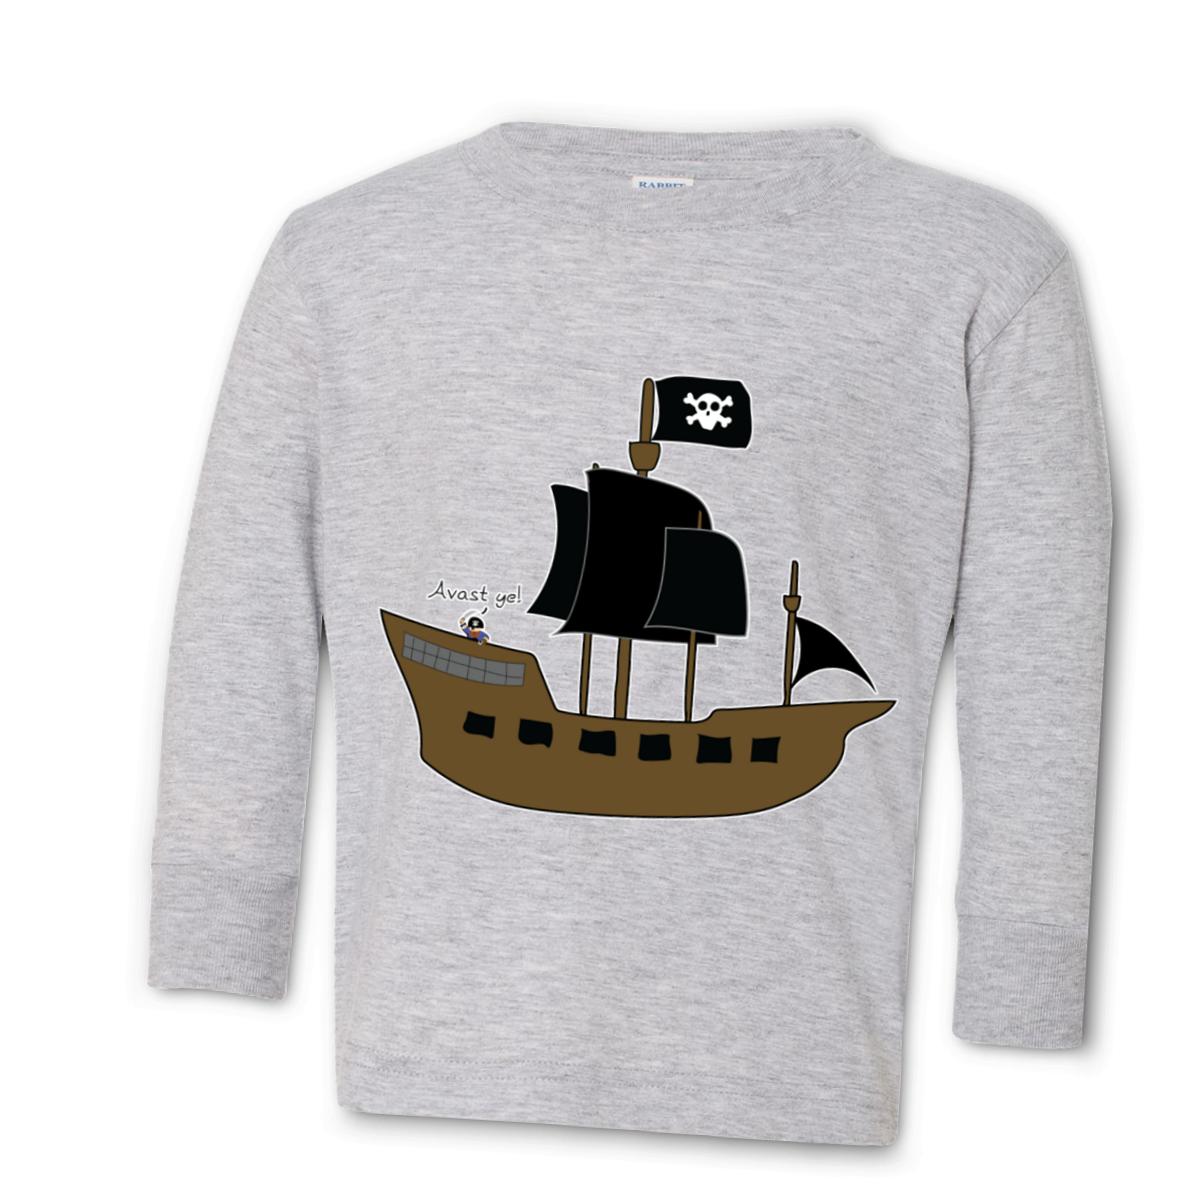 Pirate Ship Toddler Long Sleeve Tee 2T heather